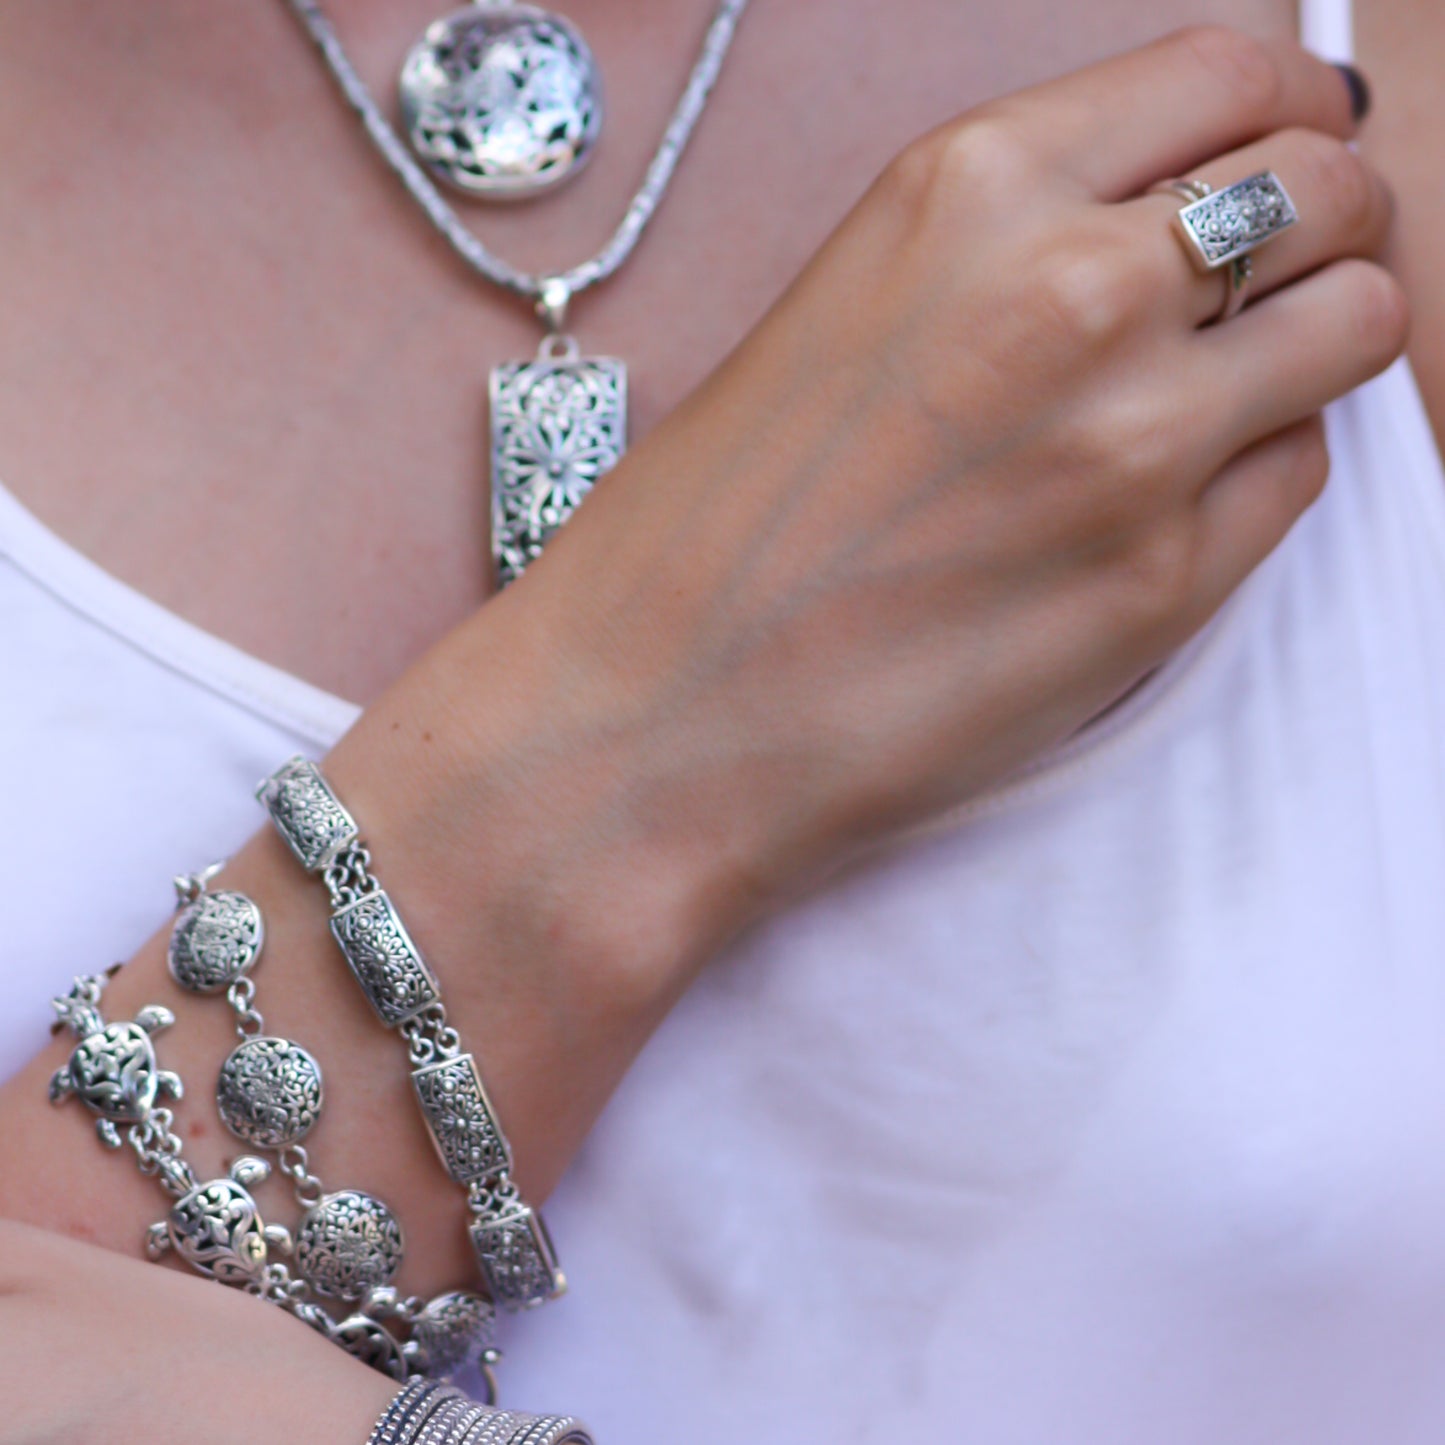 Woman wearing various silver bracelets, pendants and a ring.